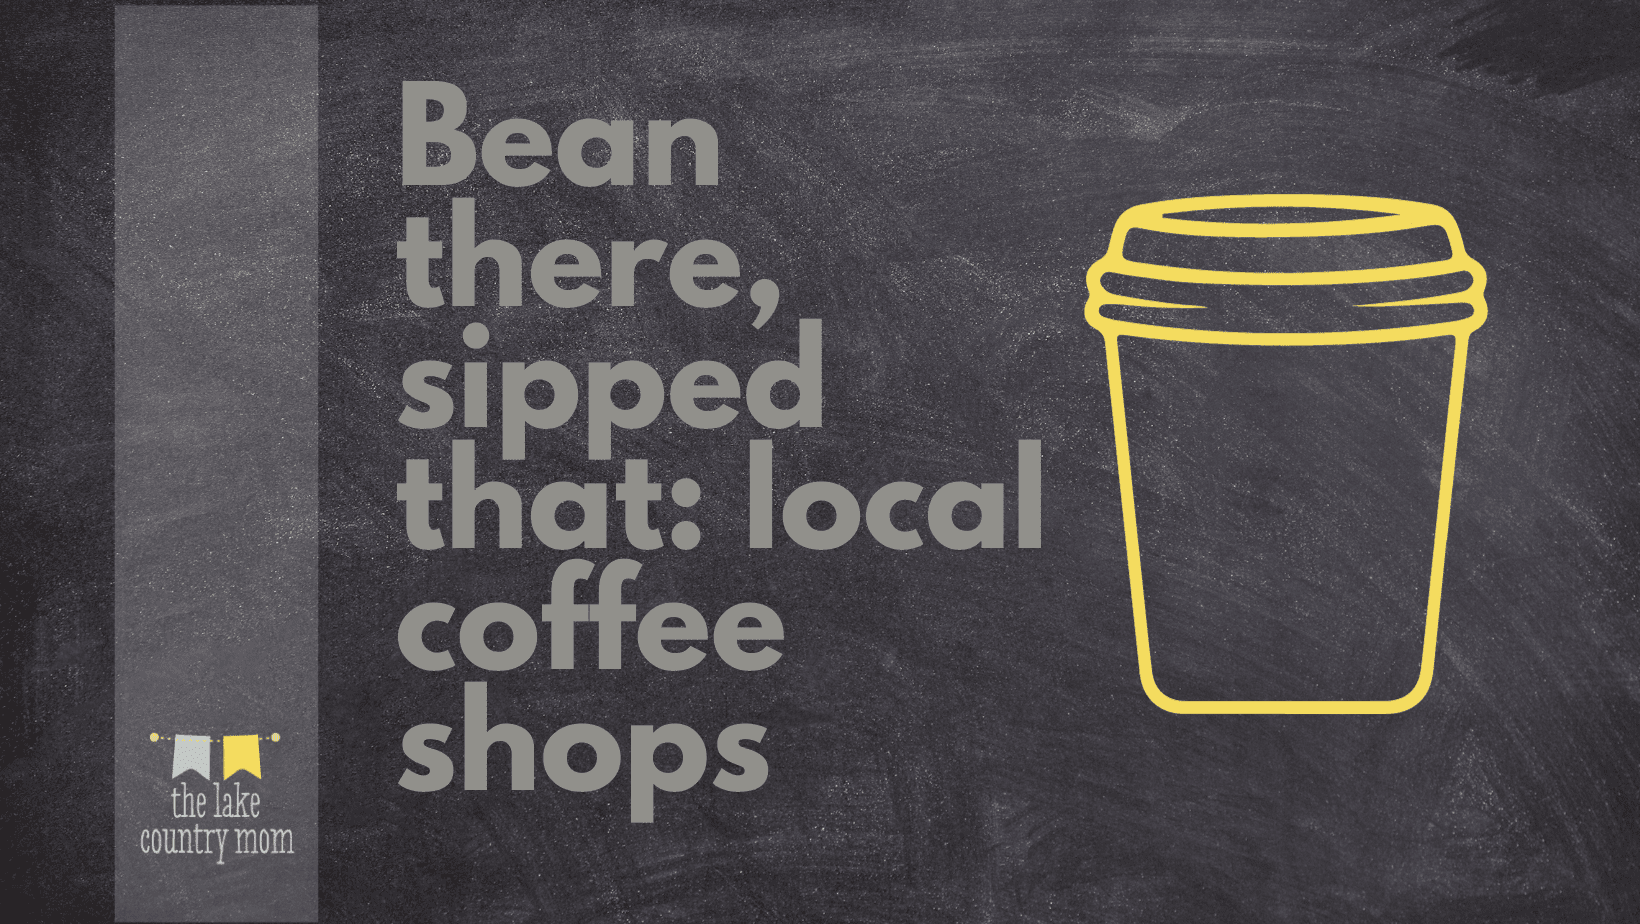 Bean there, sipped that: local coffee shops